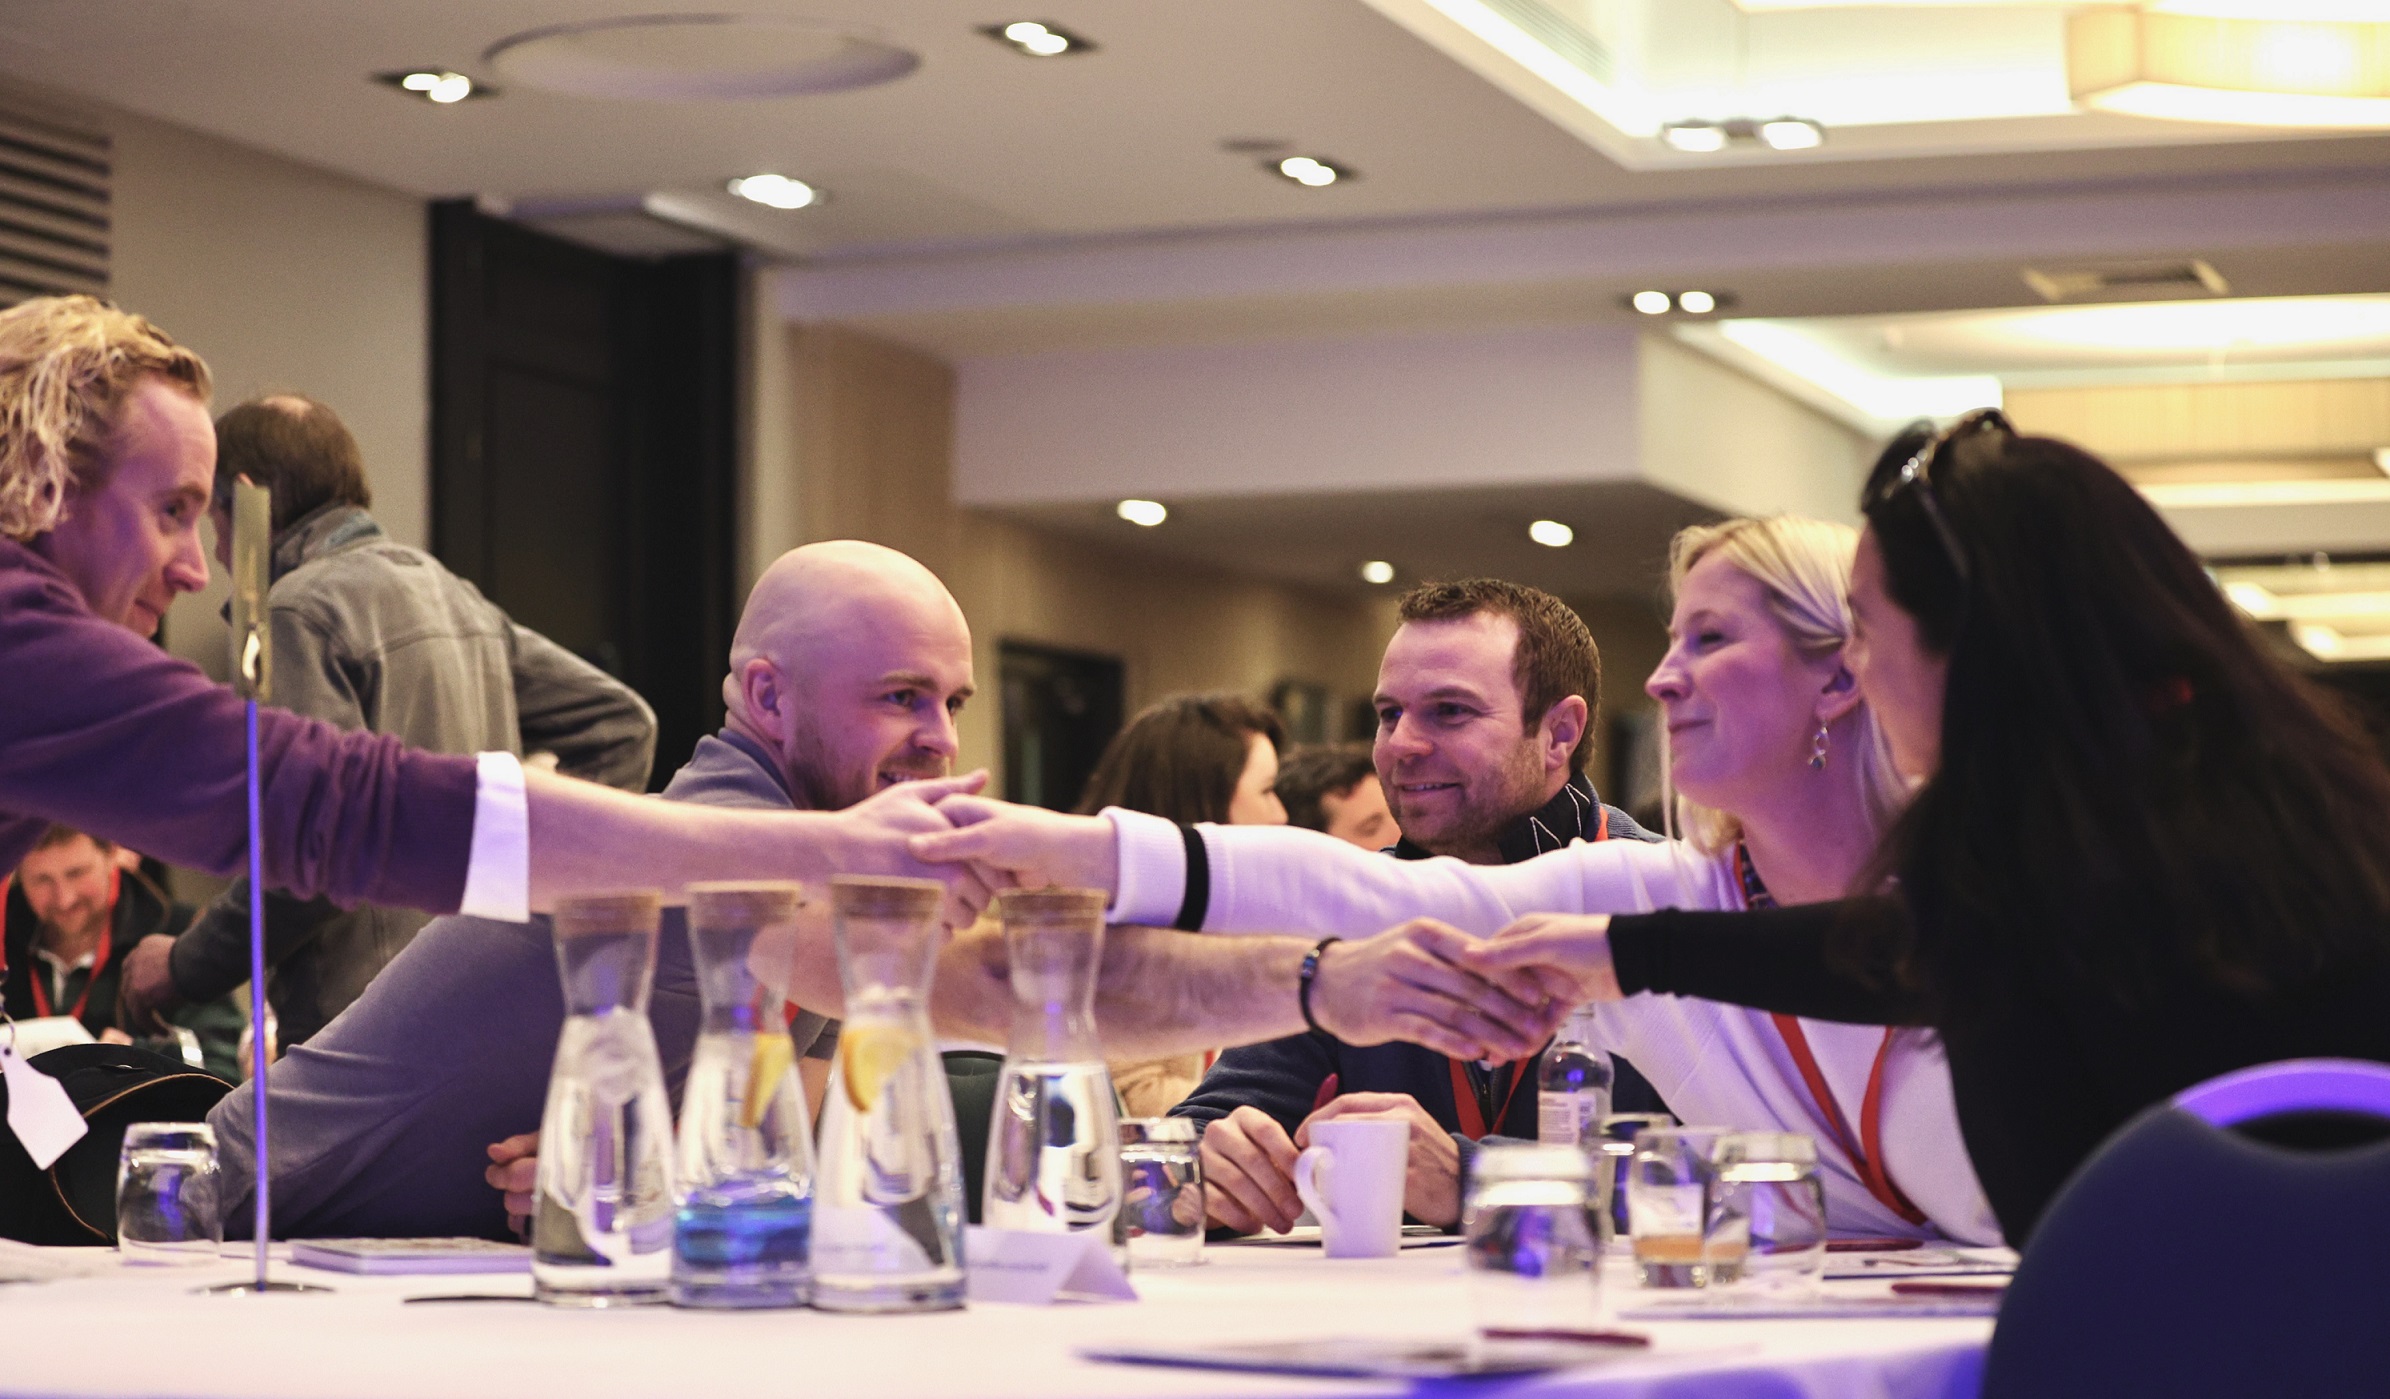 Delegates at a conference shaking hands across a table